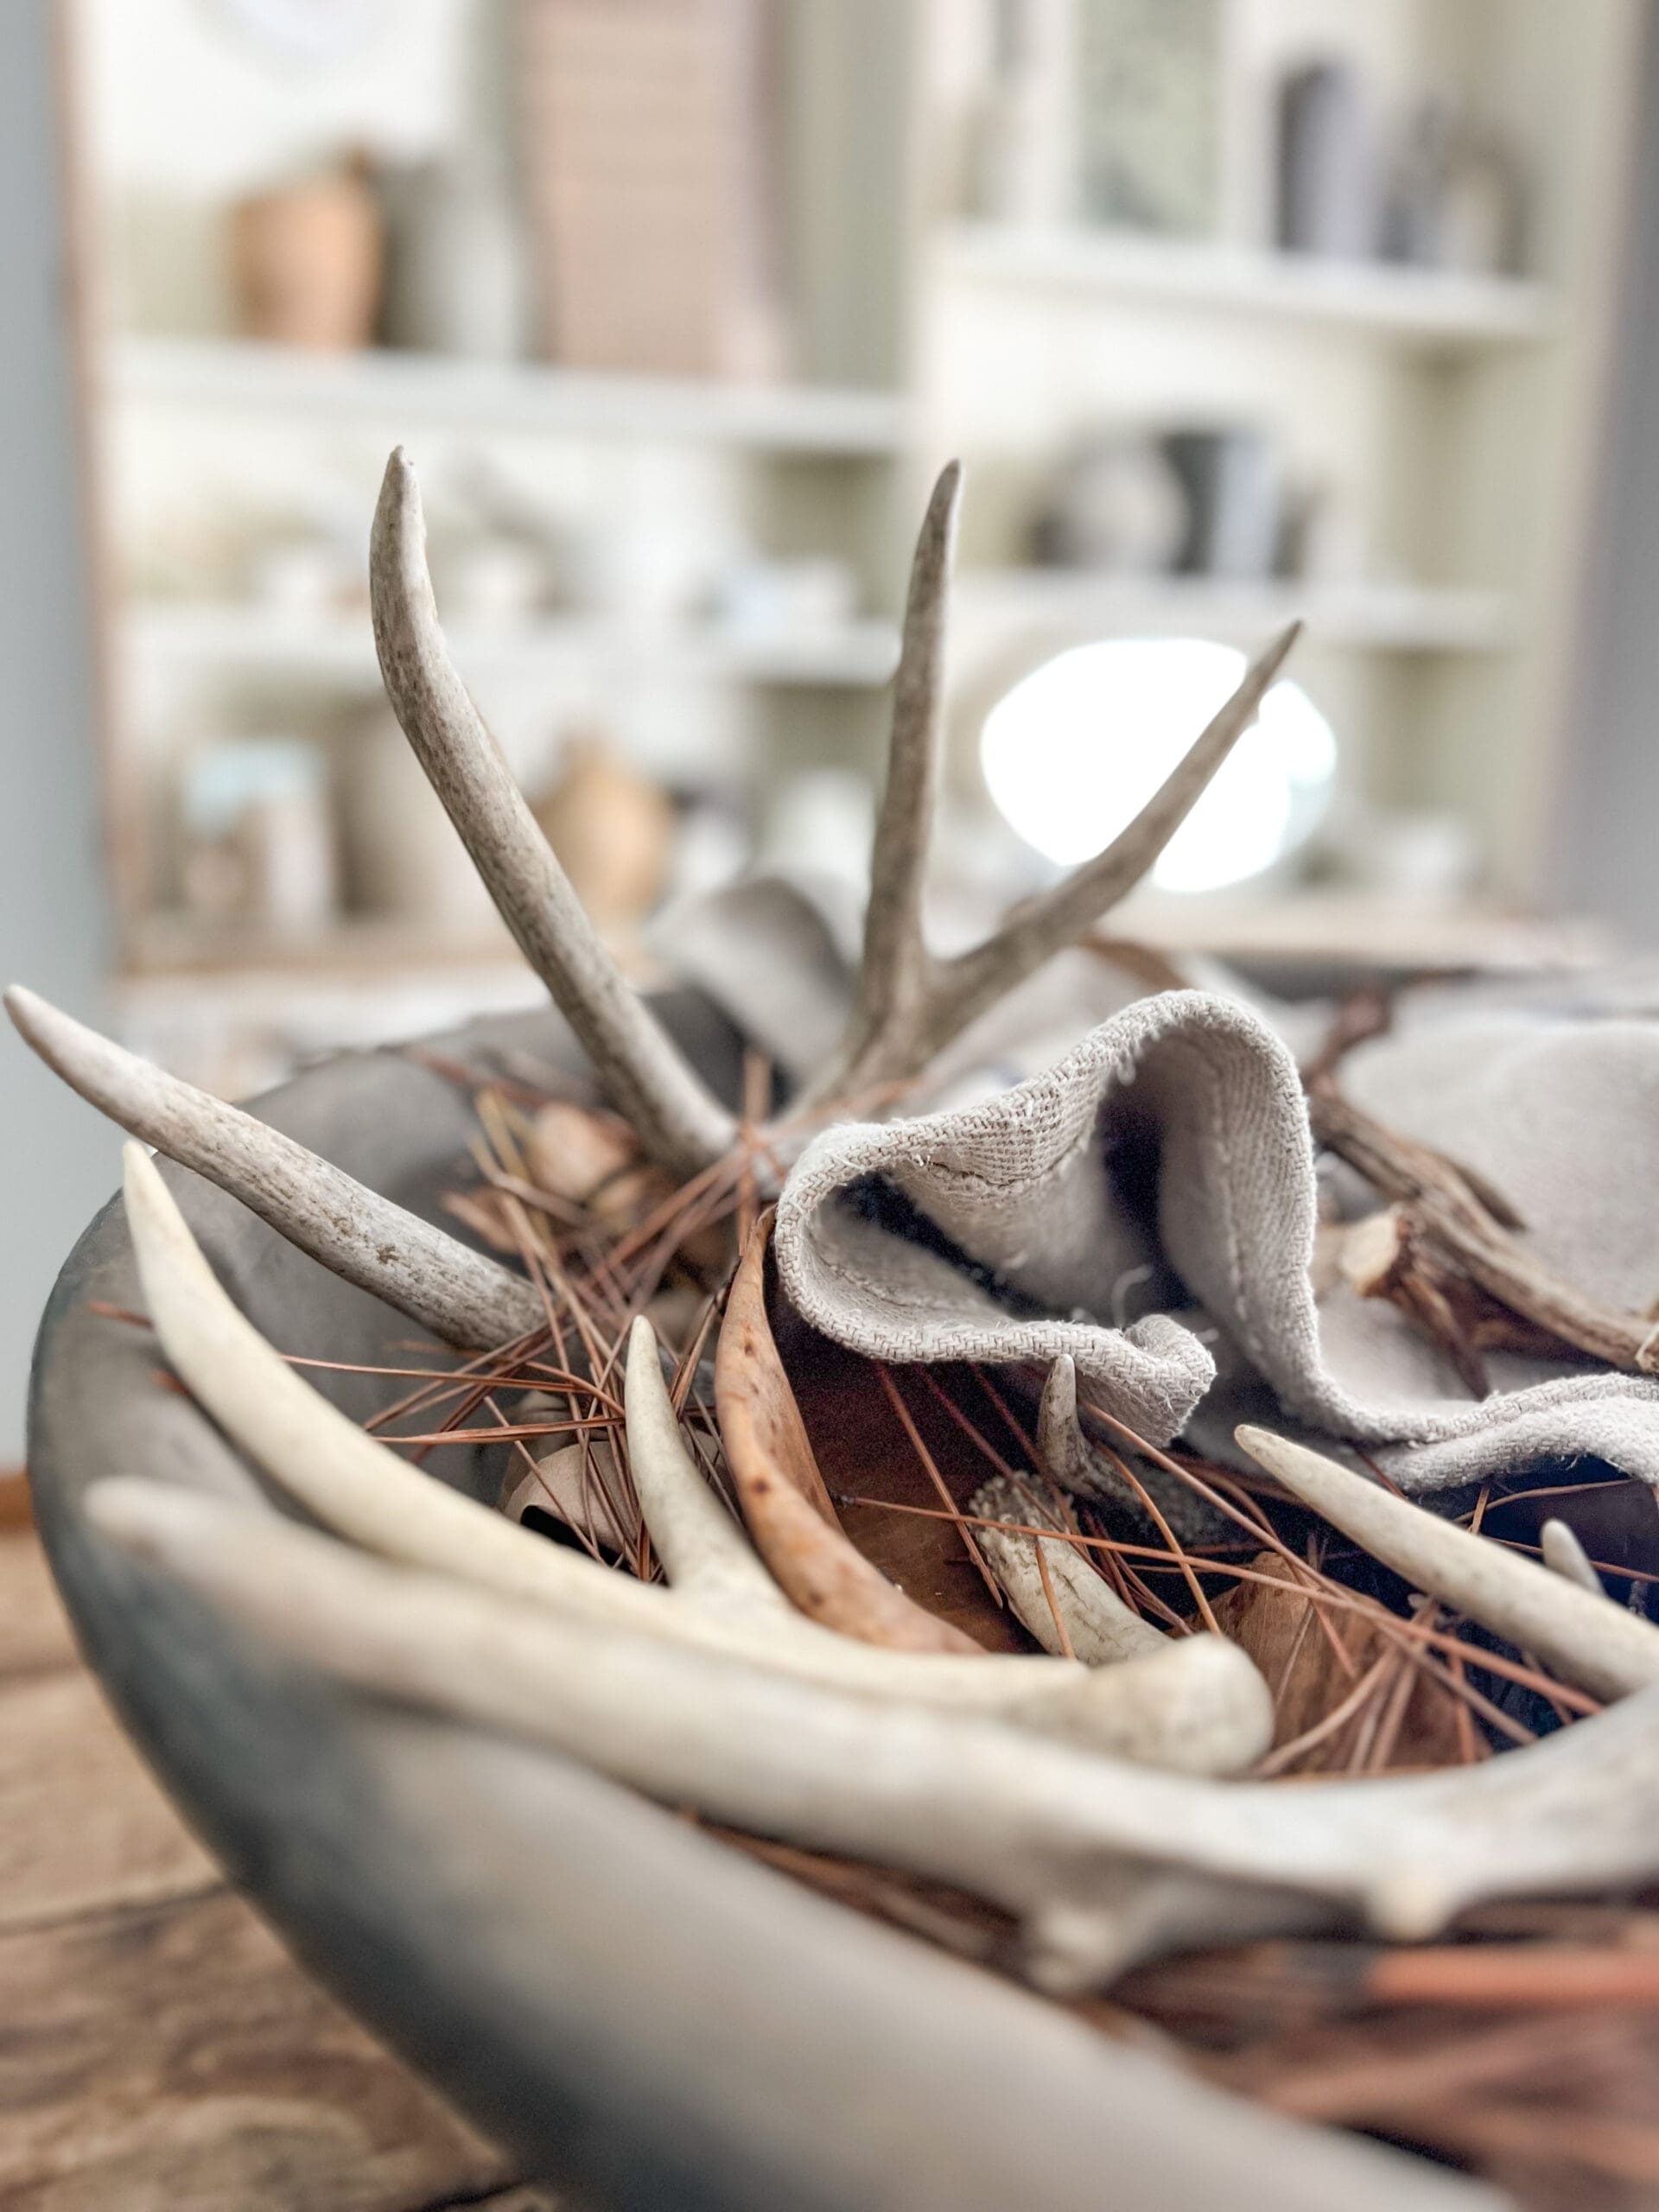 close up of a large concrete bowl filled with antlers and pine needles